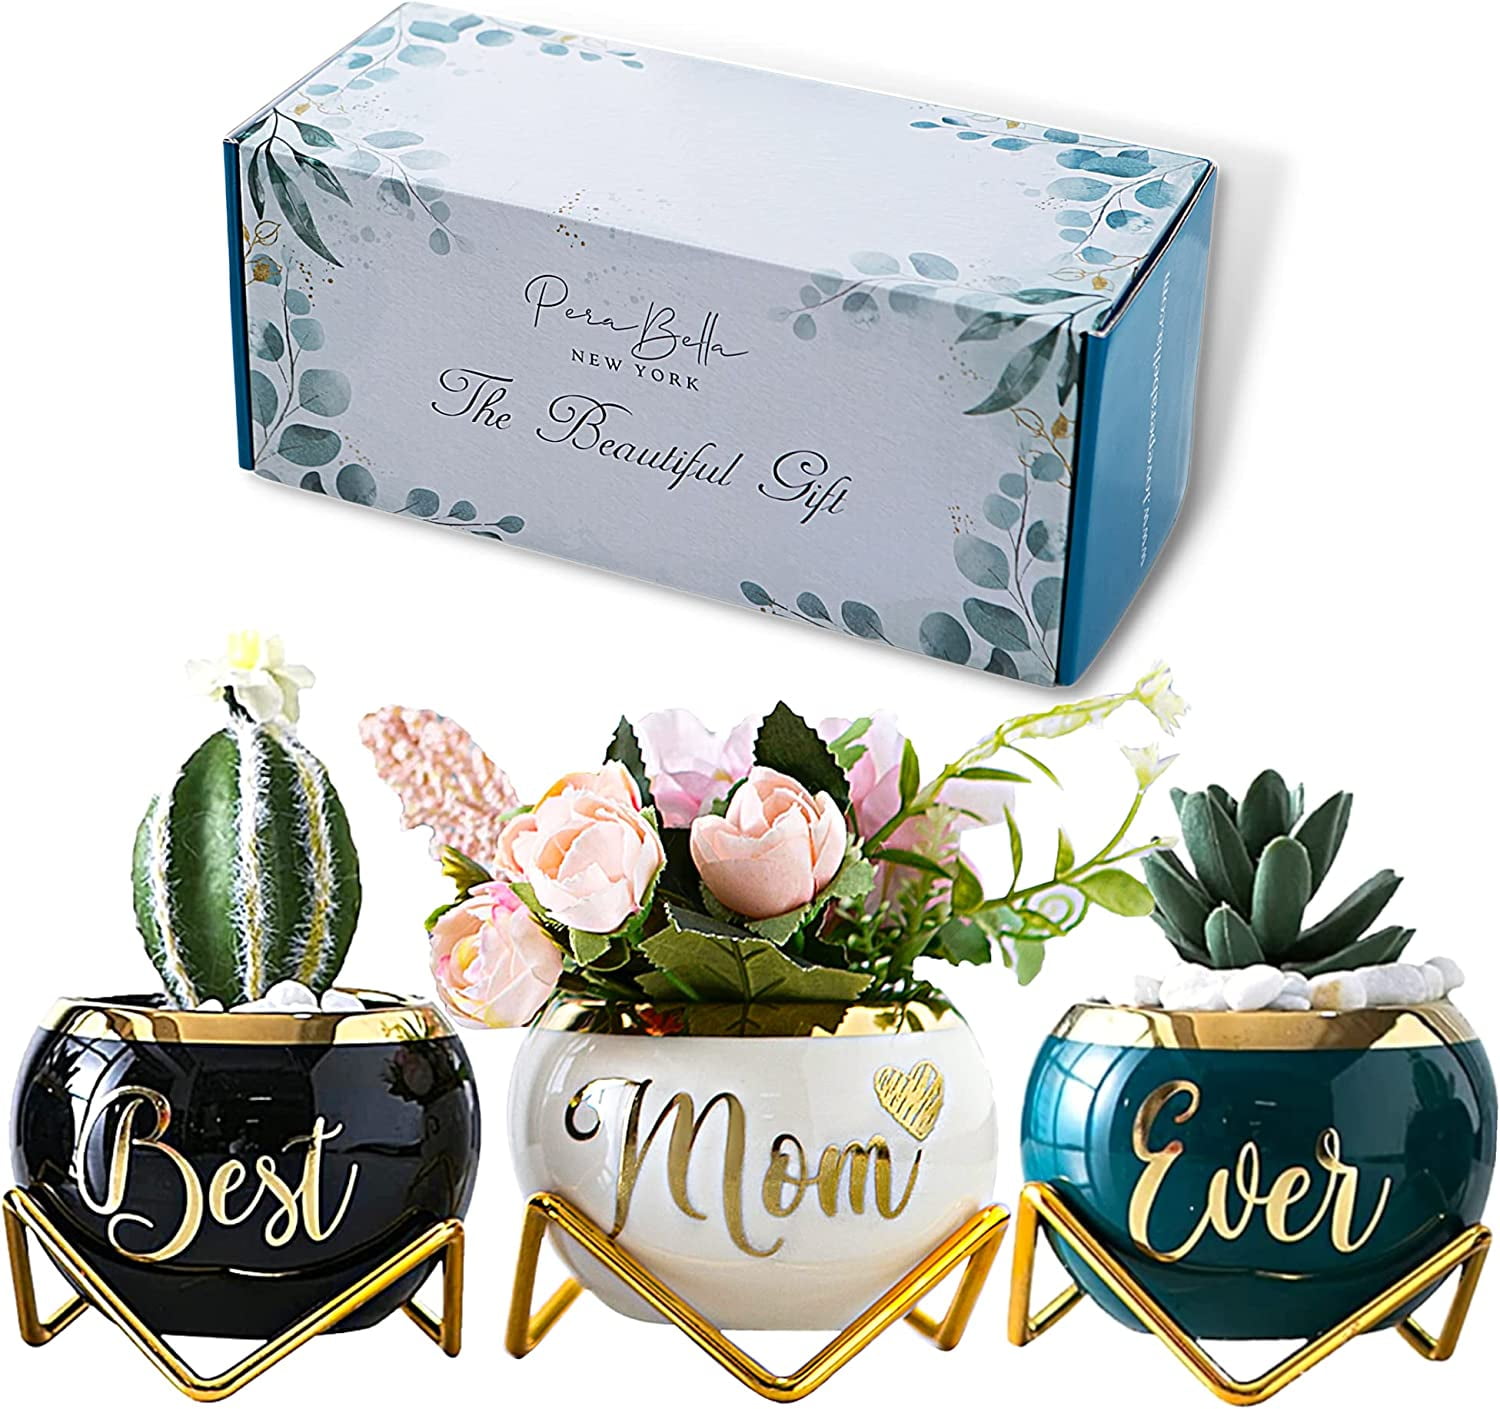 15 Insanely Good Gift Ideas For Mom - Hello Spoonful